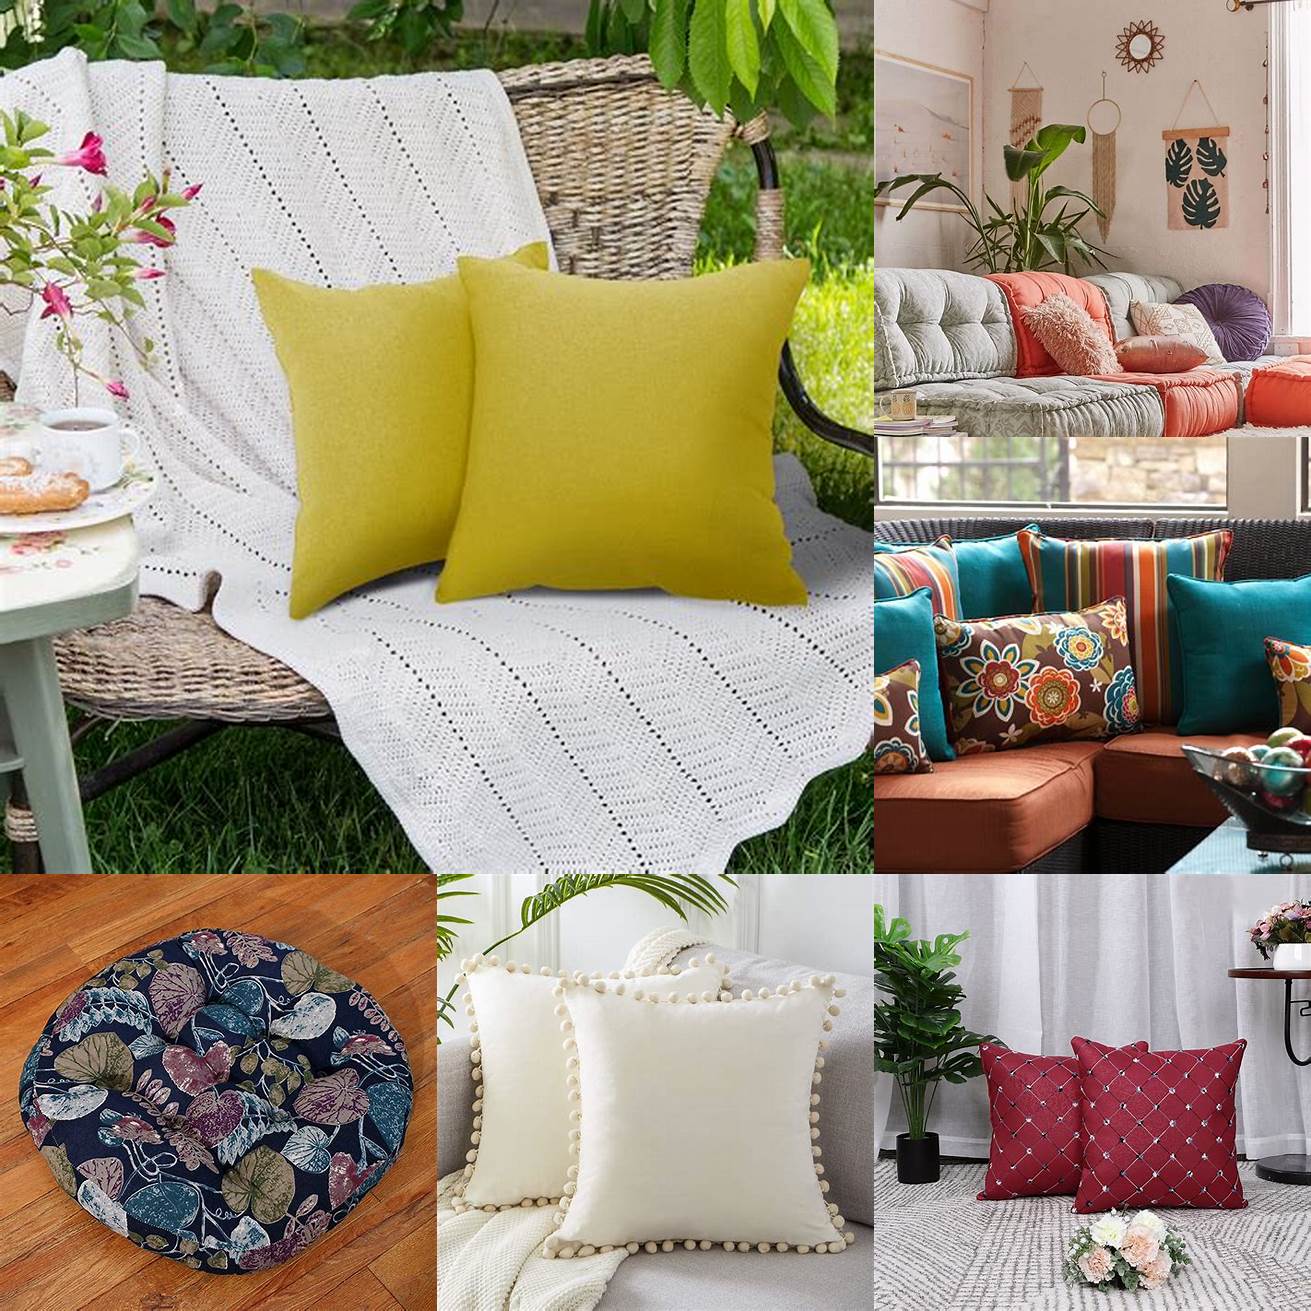 Cushions and Accessories